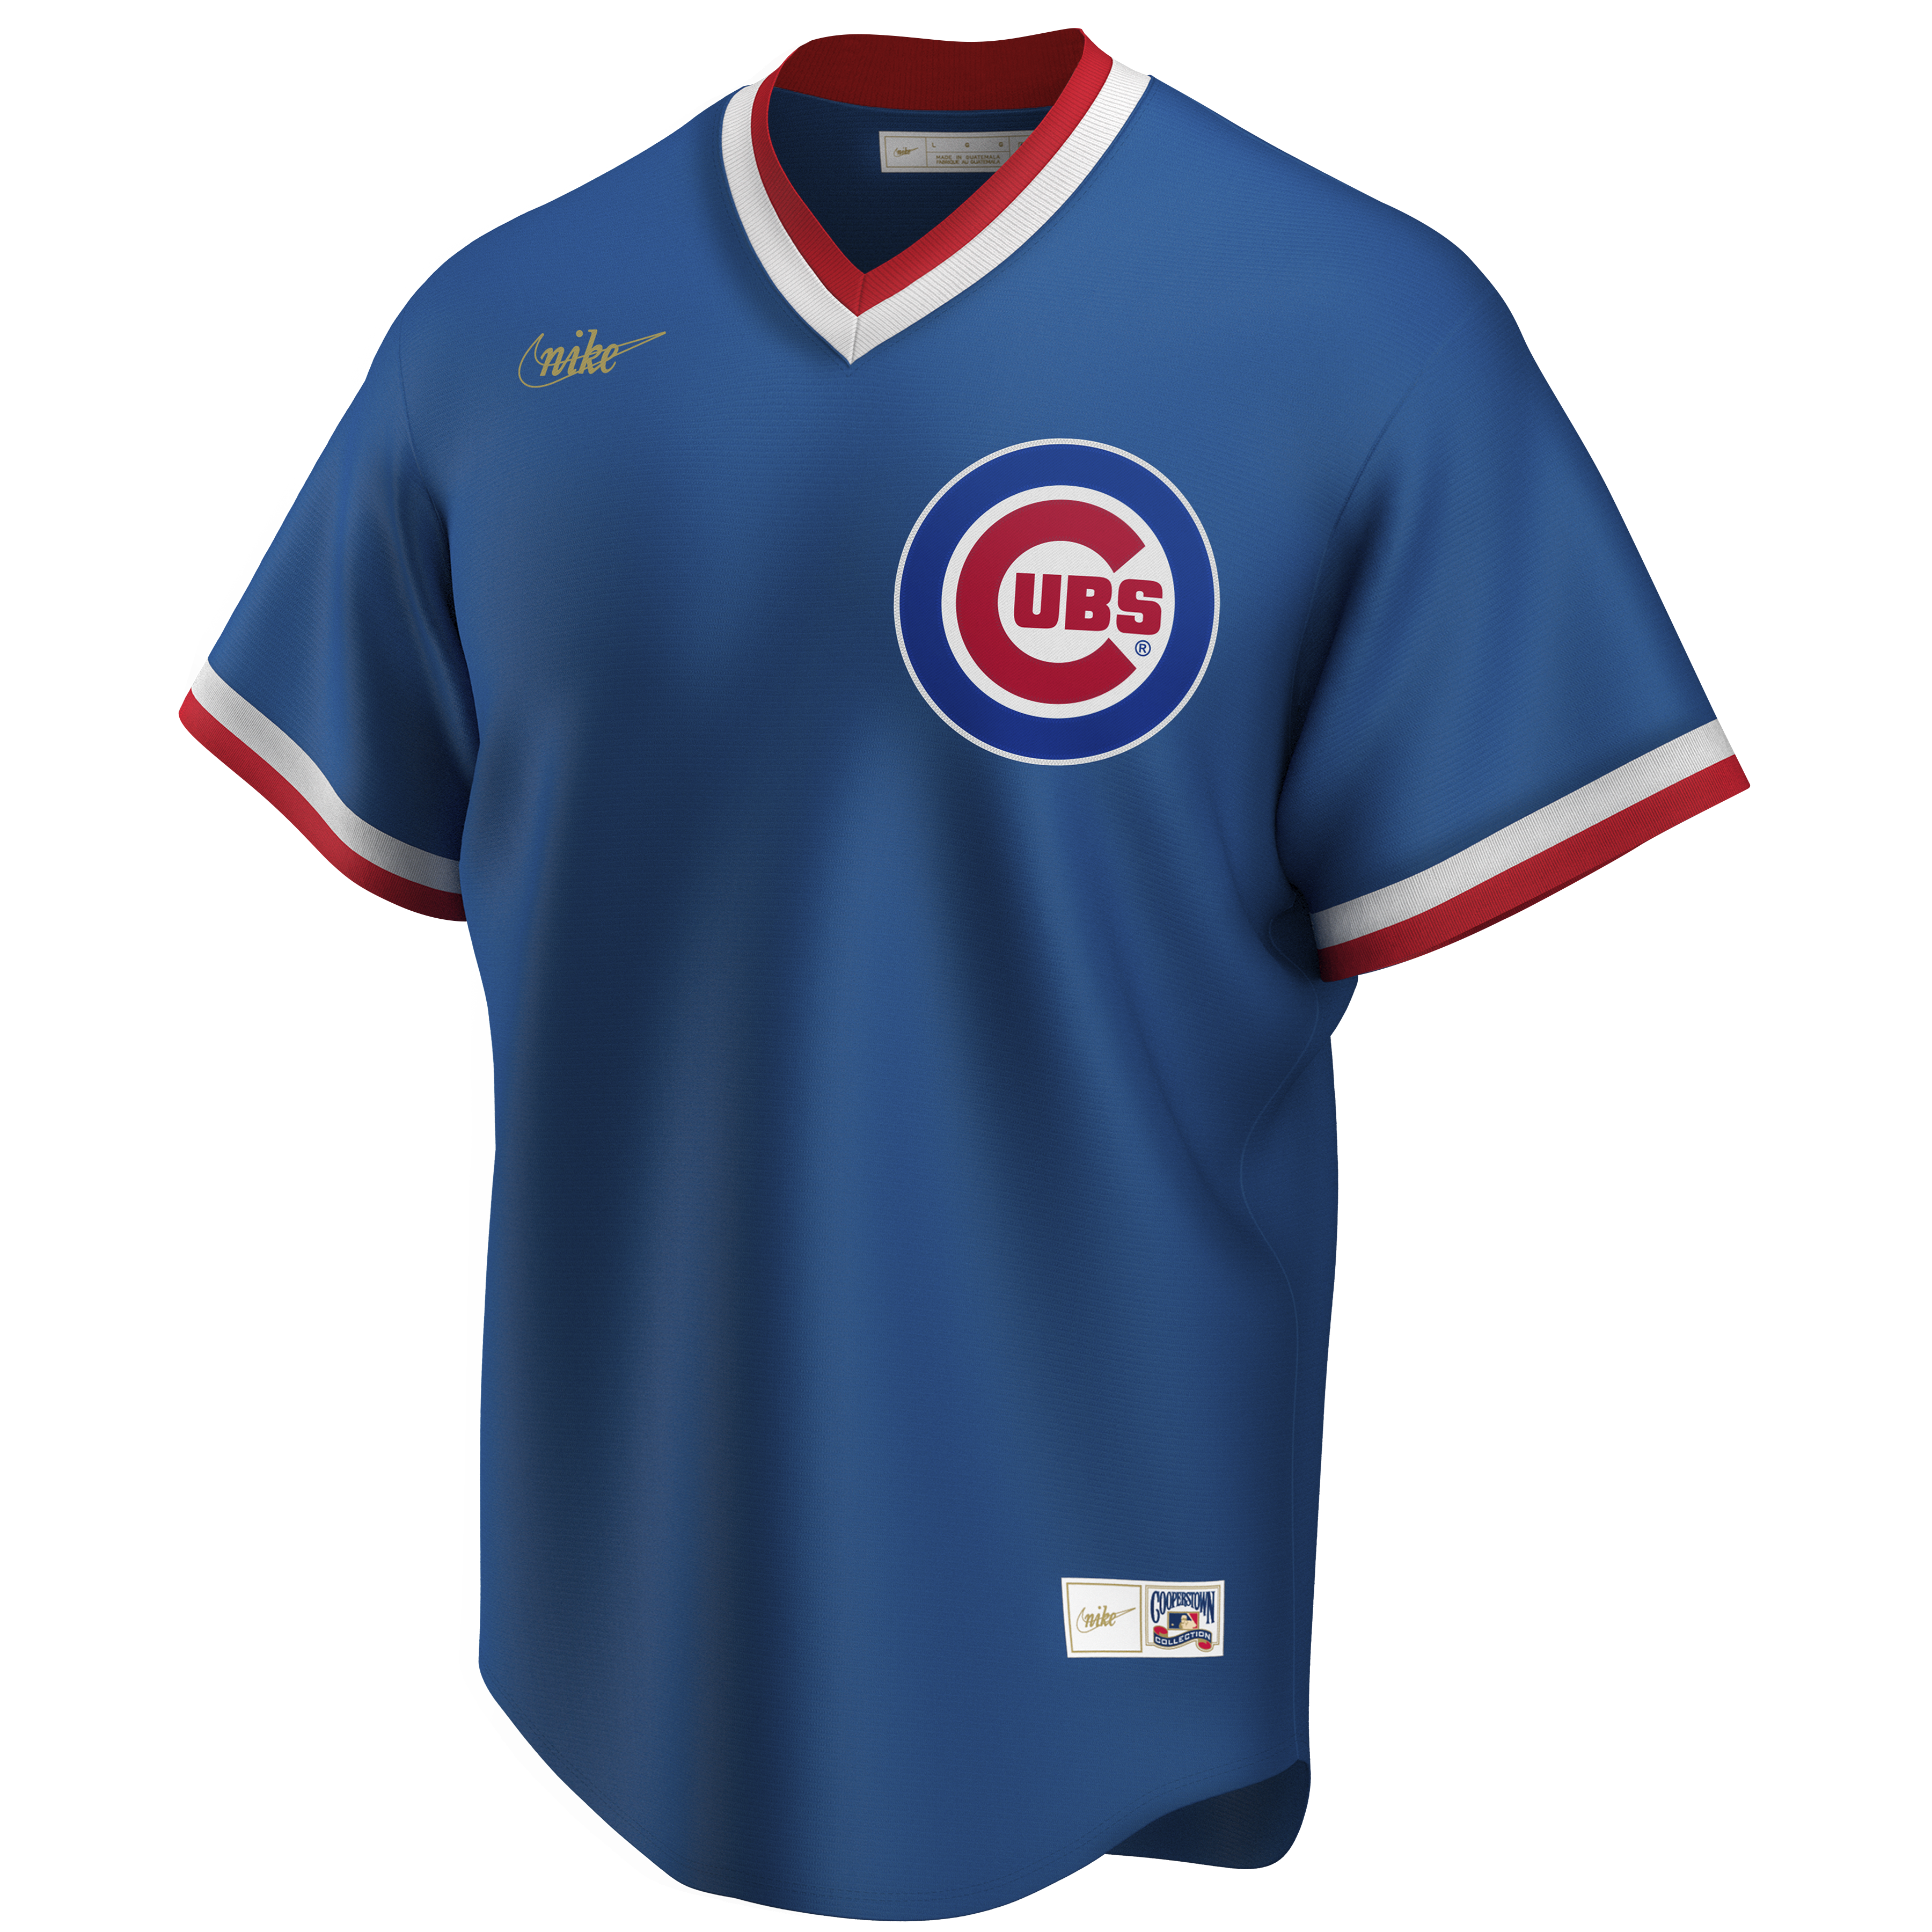 Nike Men's Chicago Cubs Royal Road Cooperstown Collection Team Jersey